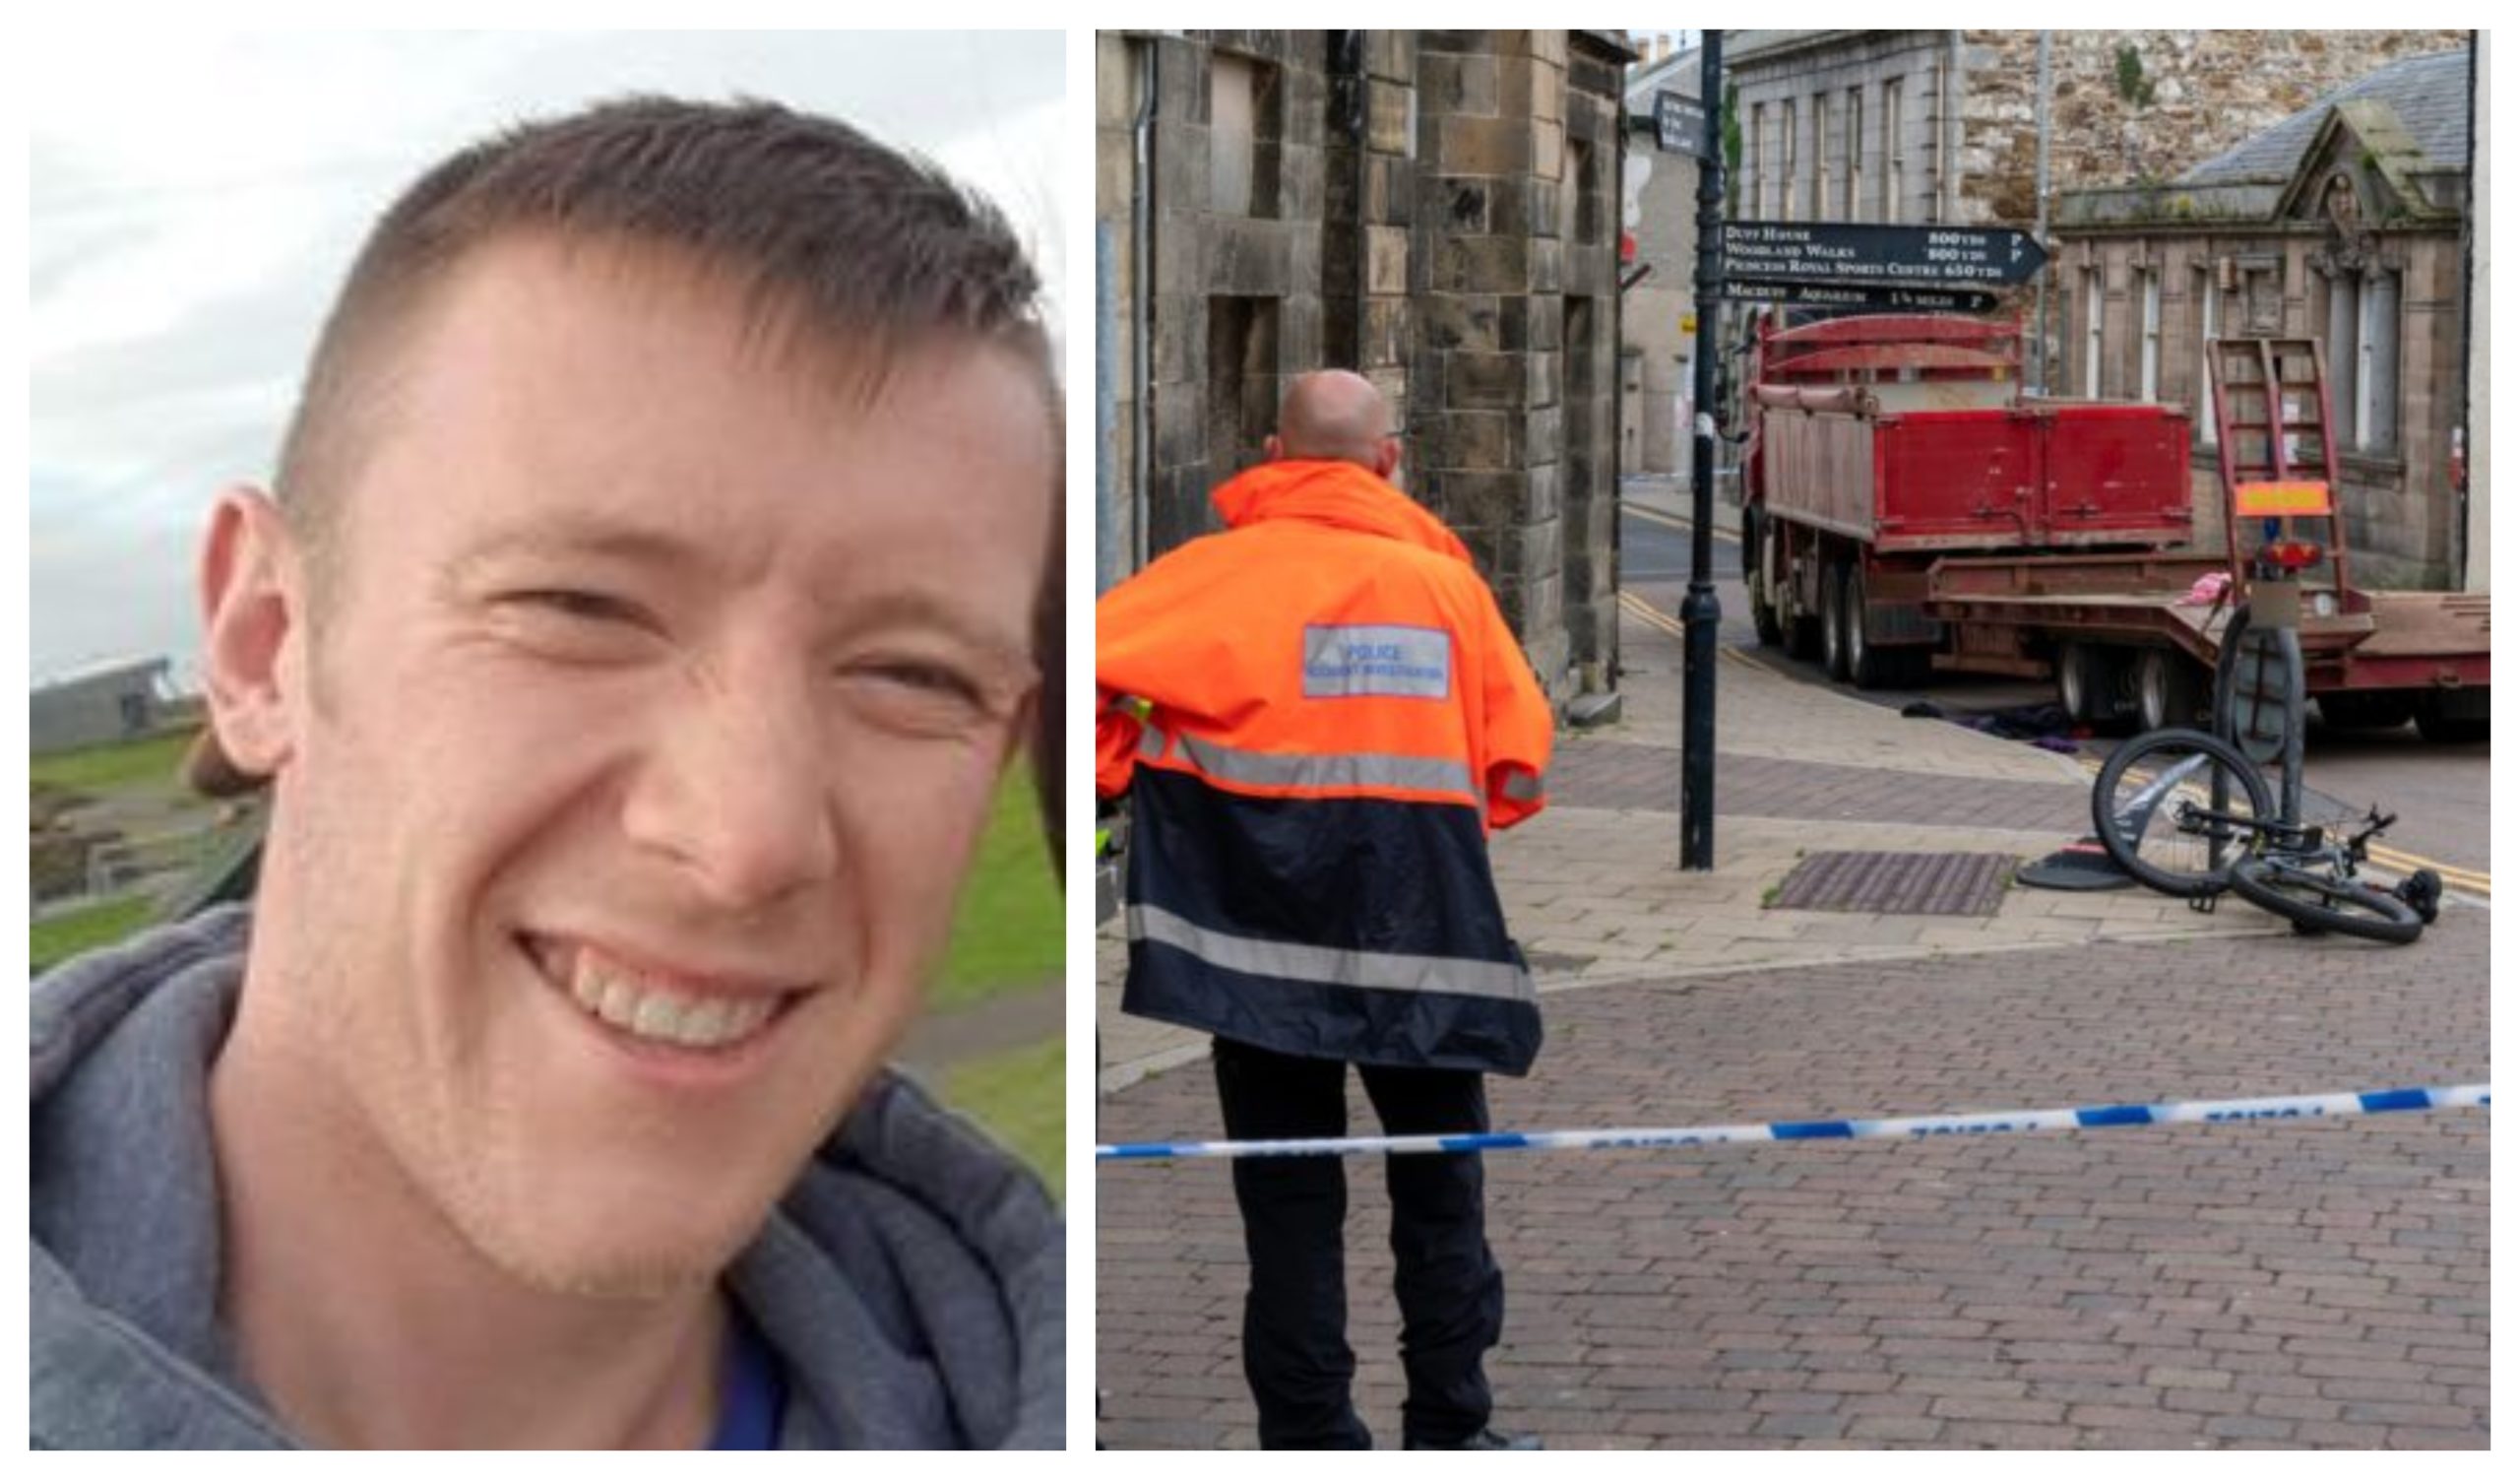 Rikki Gault died following the incident on Low Street in Banff.